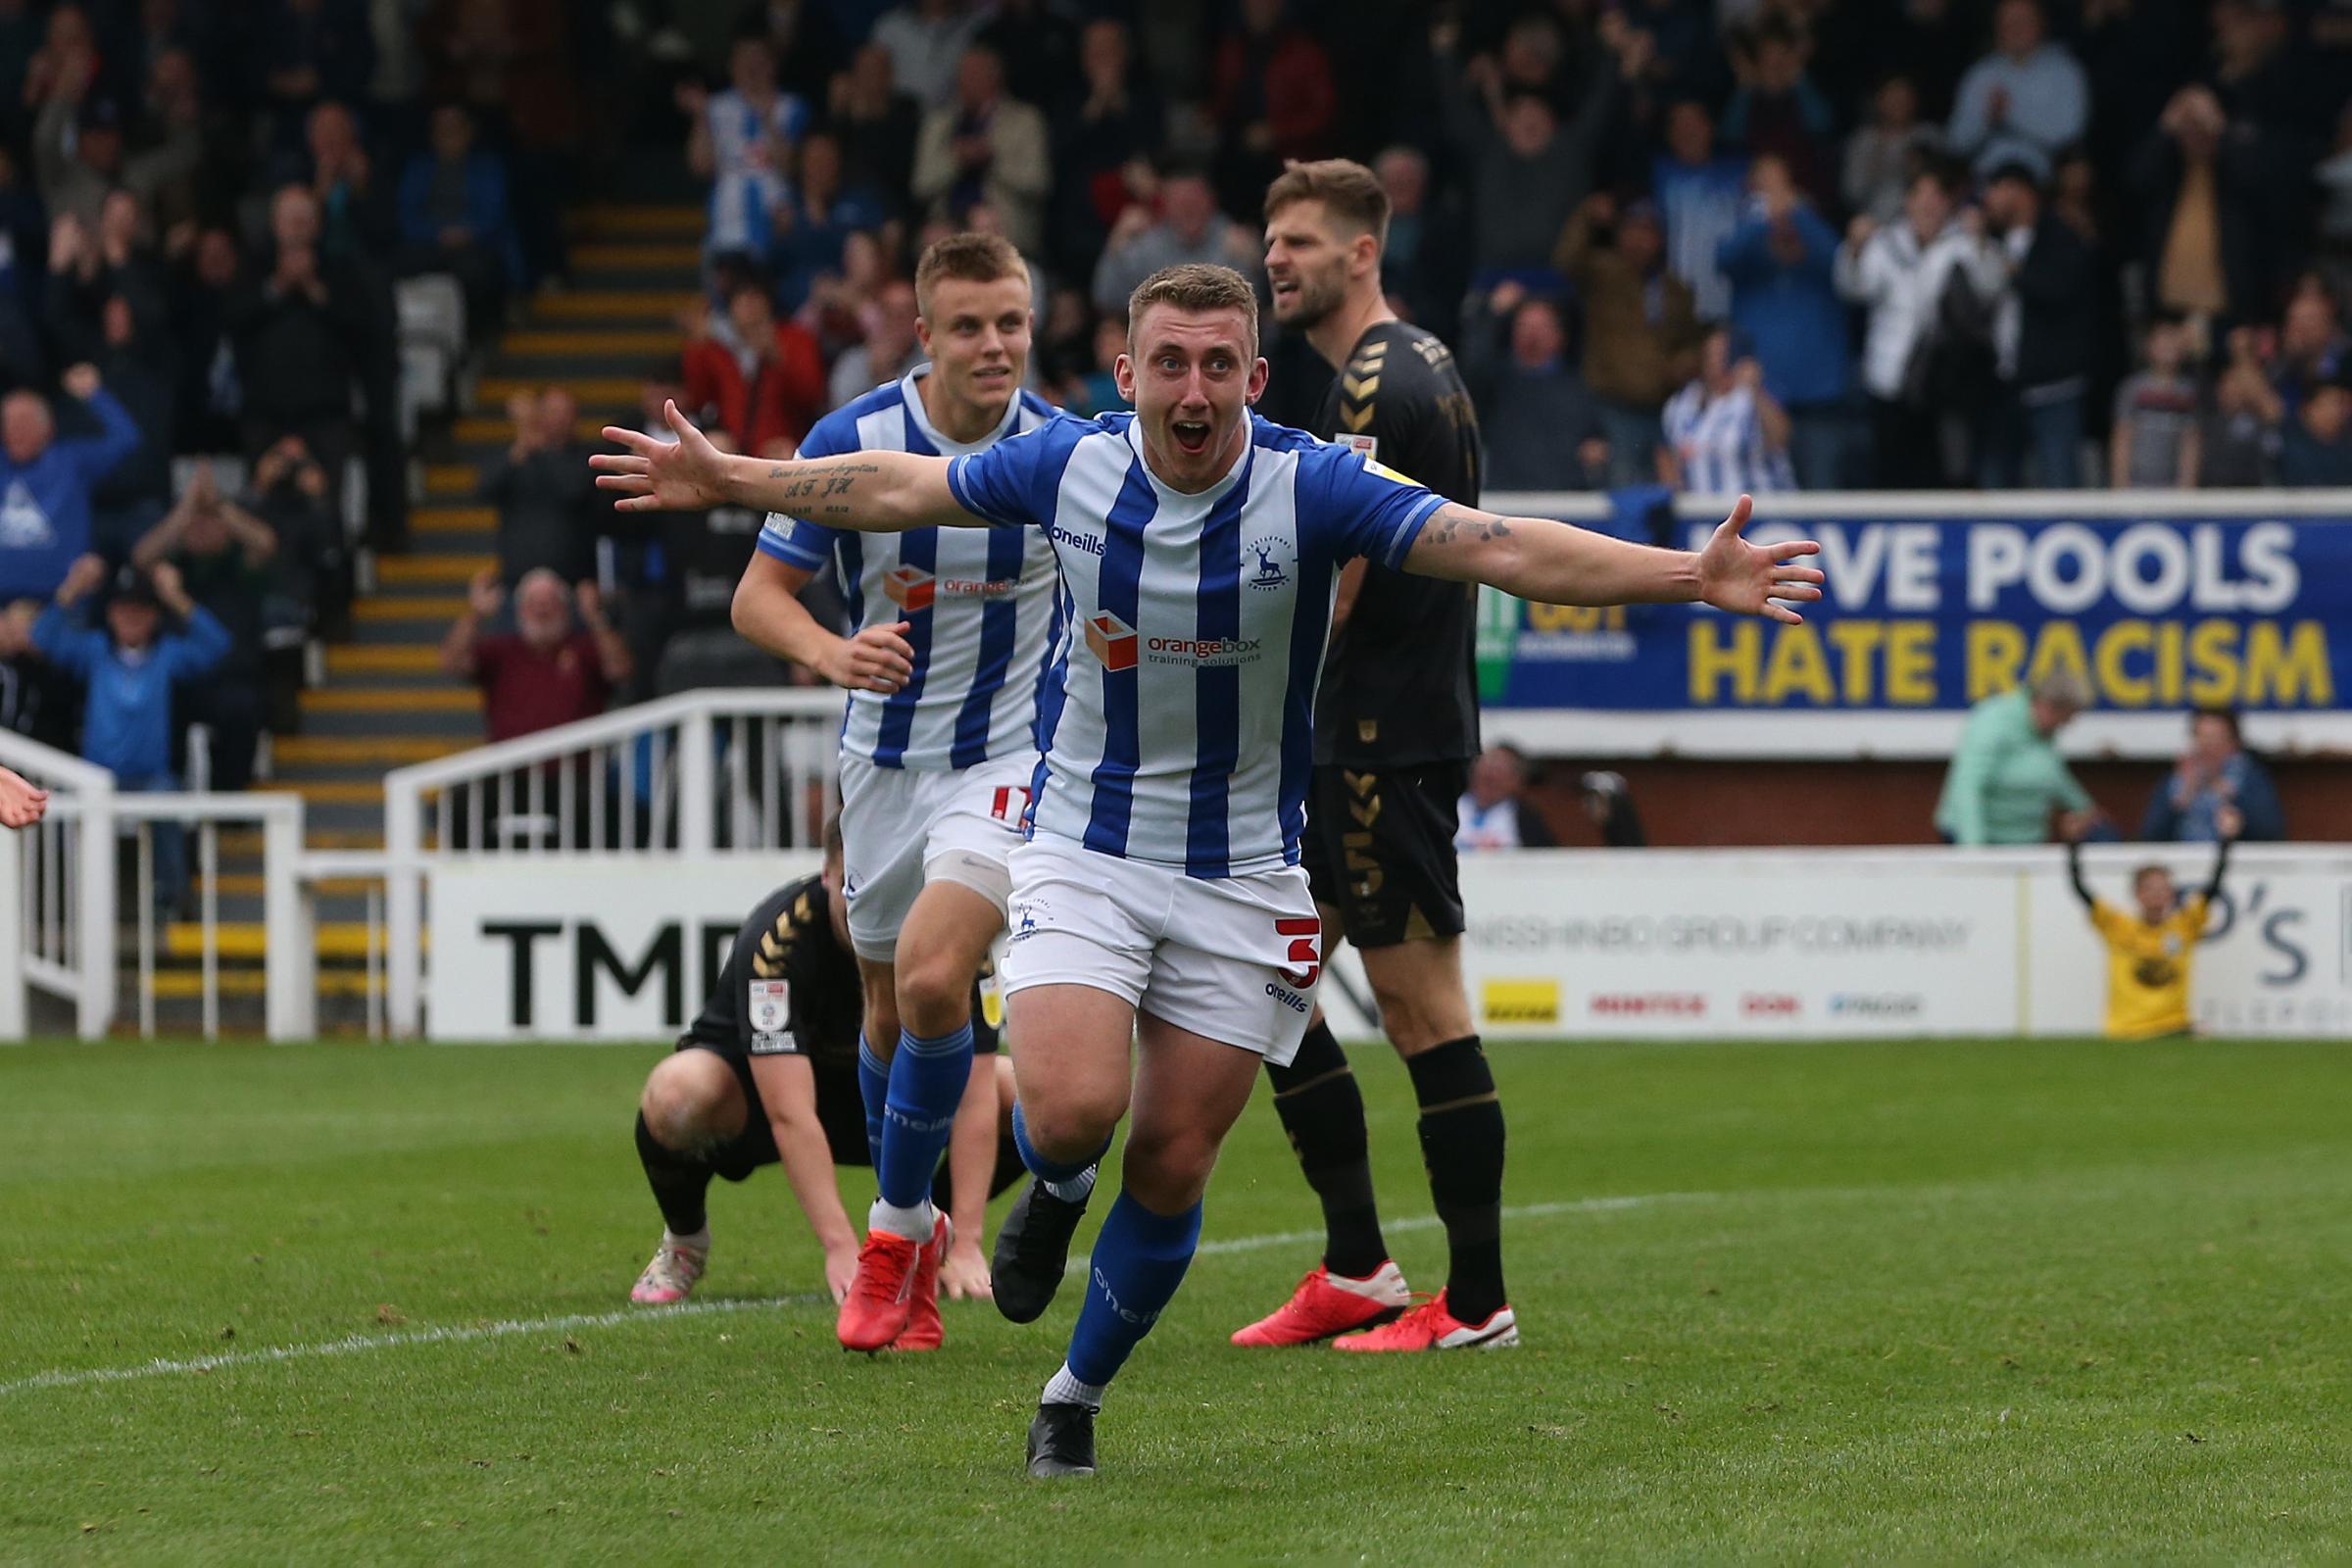 The cup upsets of Hartlepool United and the impact it's had on their season